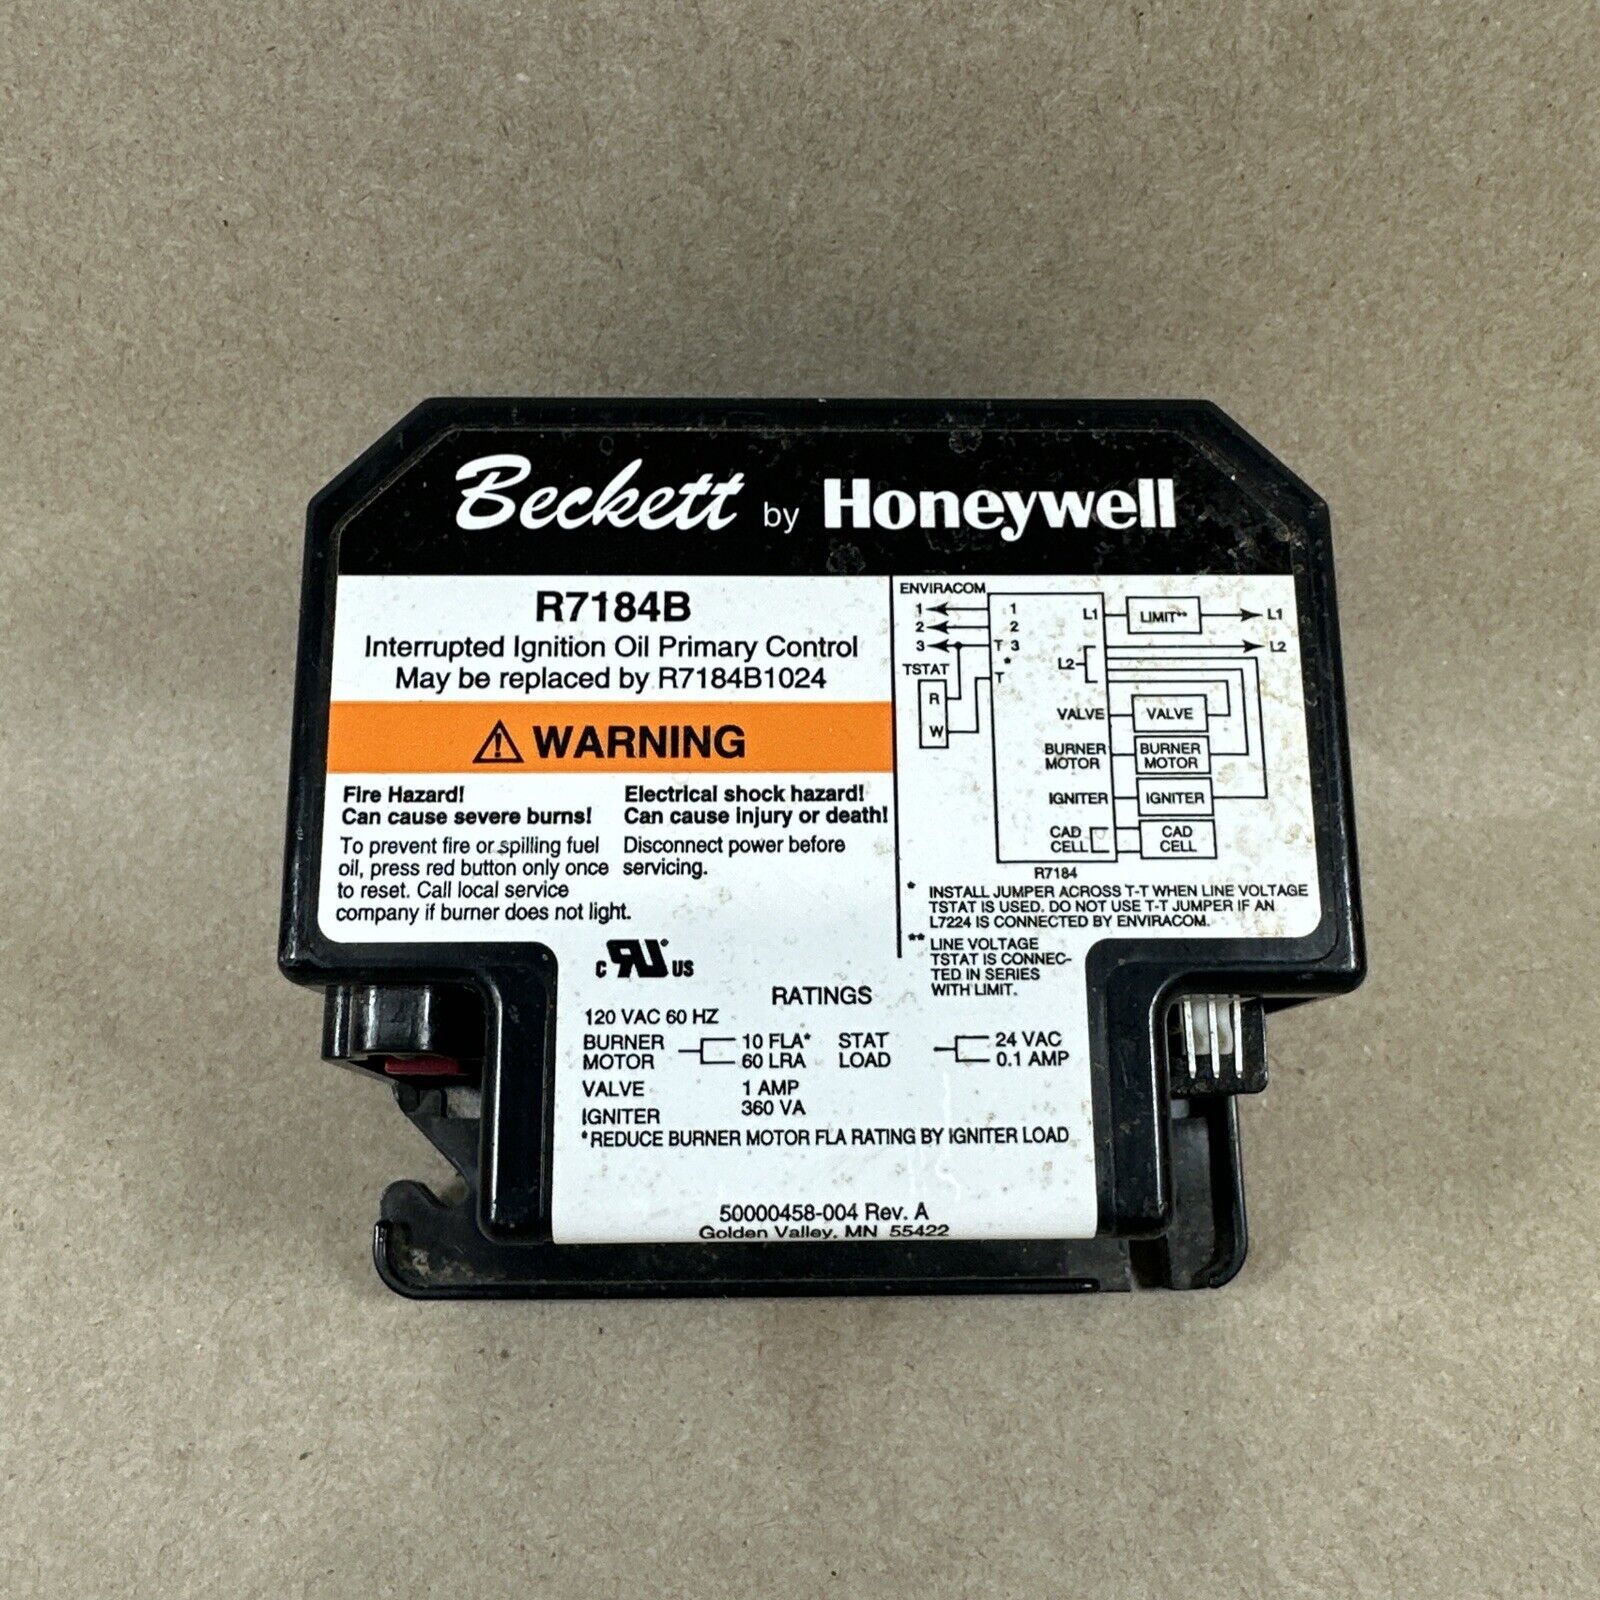 Ignition Oil Primary Control Beckett By Honeywell R7184B 1032